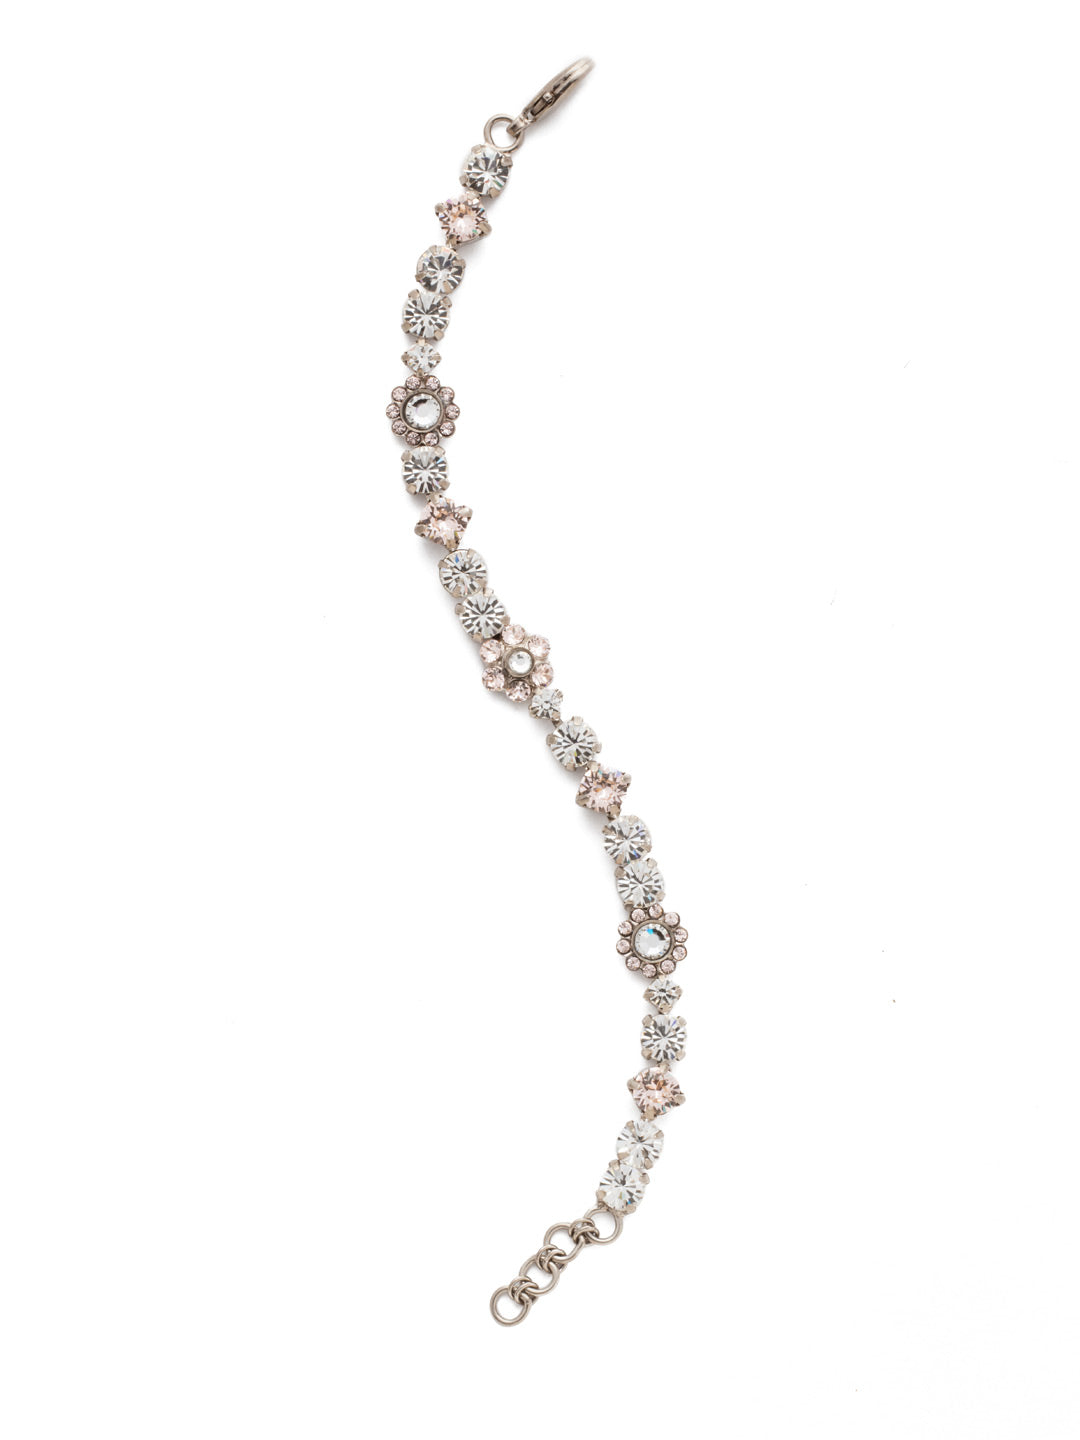 Classic Floral Tennis Bracelet - BBE2ASPLS - Blossoming beauty. This classic bracelet features a combination of round and floral cluster crystals to create the perfect amount of sweet sparkle.